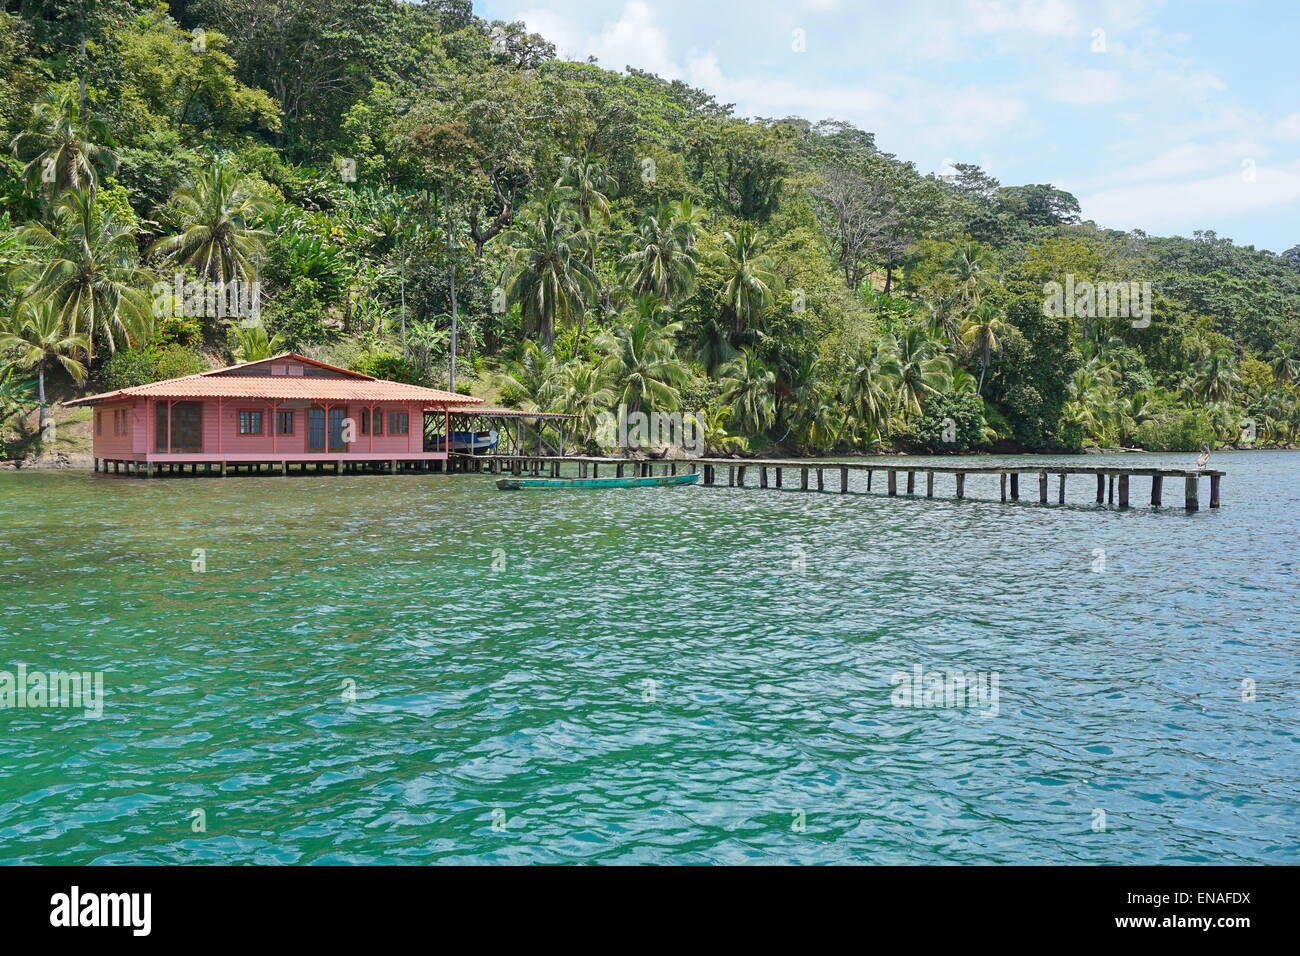 Tropical house with dock over the sea and luxuriant tropical vegetation on the land, Caribbean coast of Panama, Bocas del Toro Stock Photo